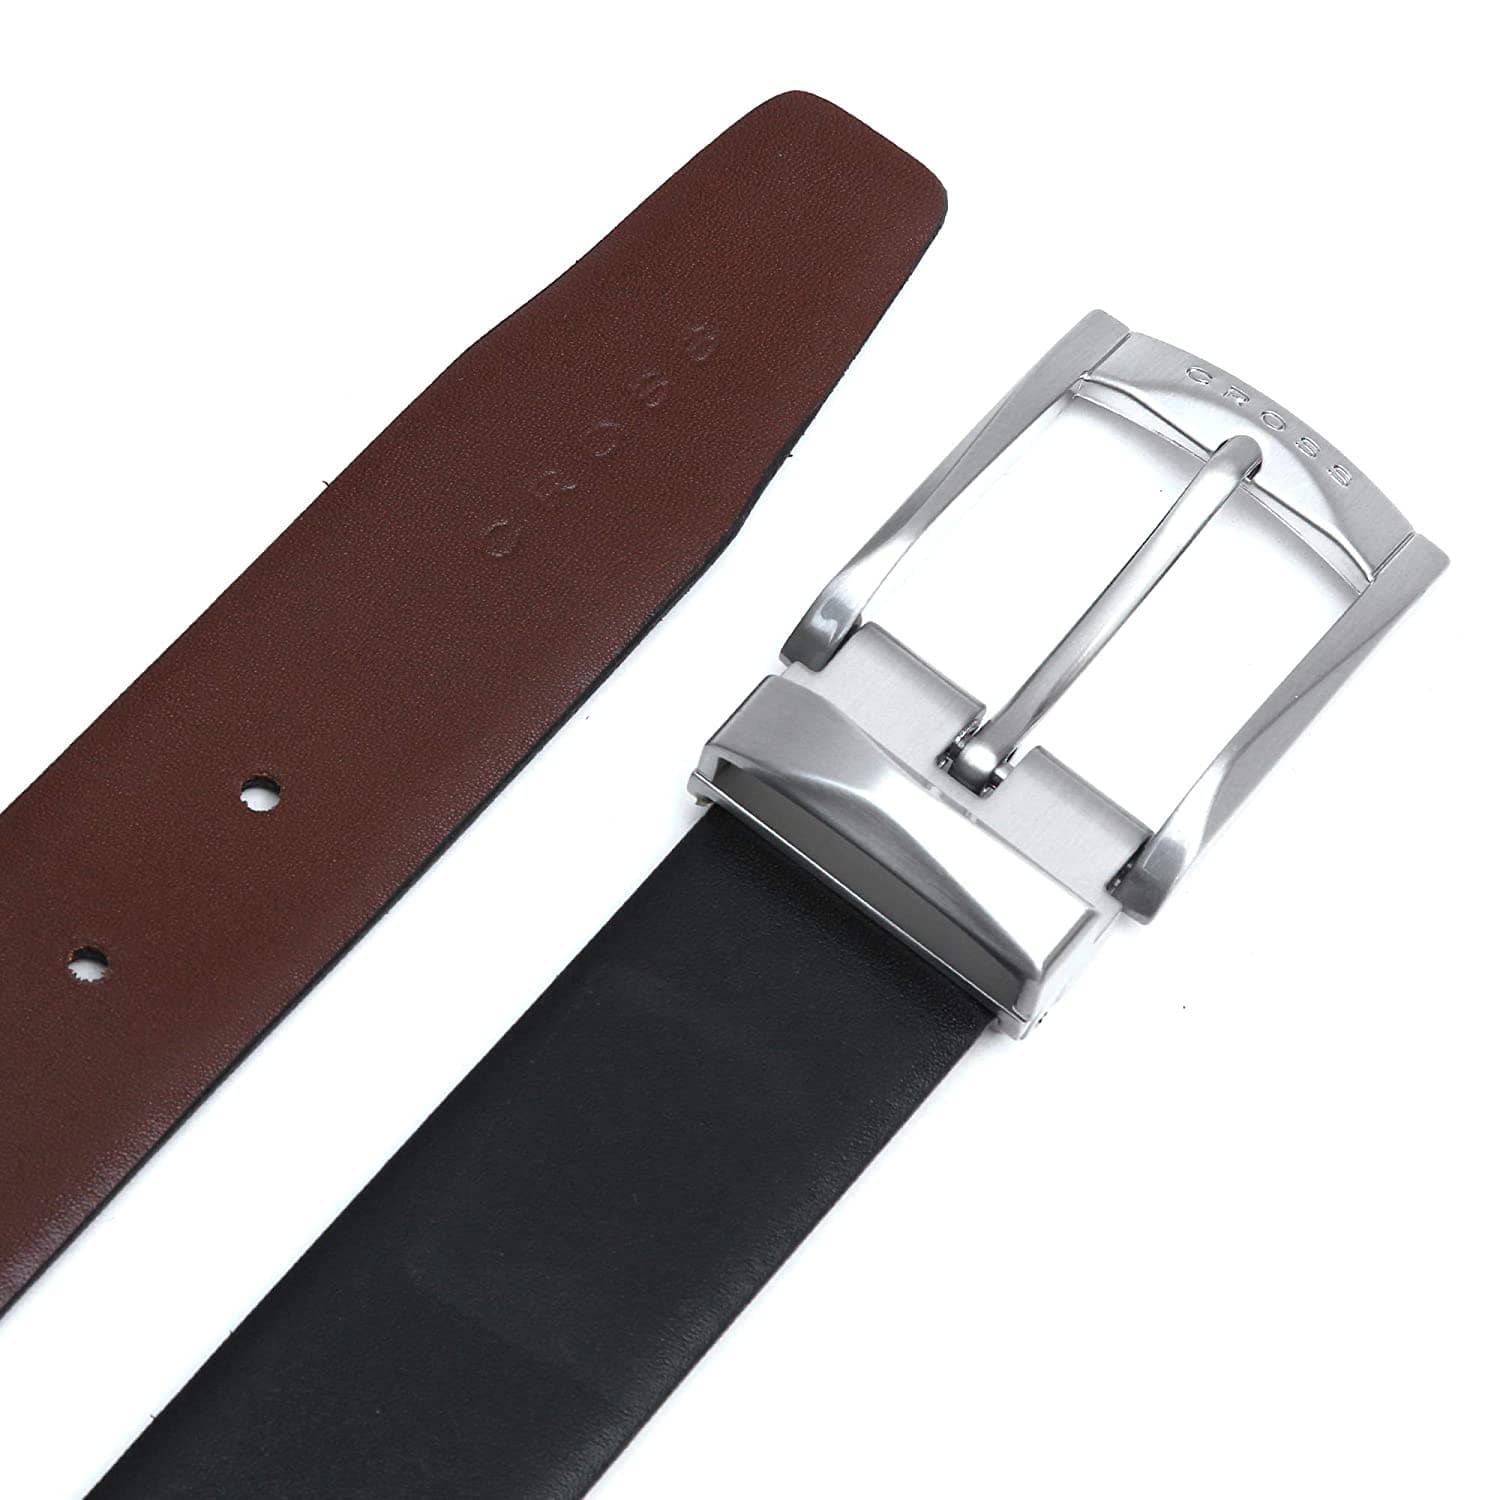 CROSS MEISTER PREMIUM LEATHER BELT WITH 30 MM PRONGED BUCKLE FOR MEN XL (102CM) - BLACK AND BROWN - AC1298194-2-XL2